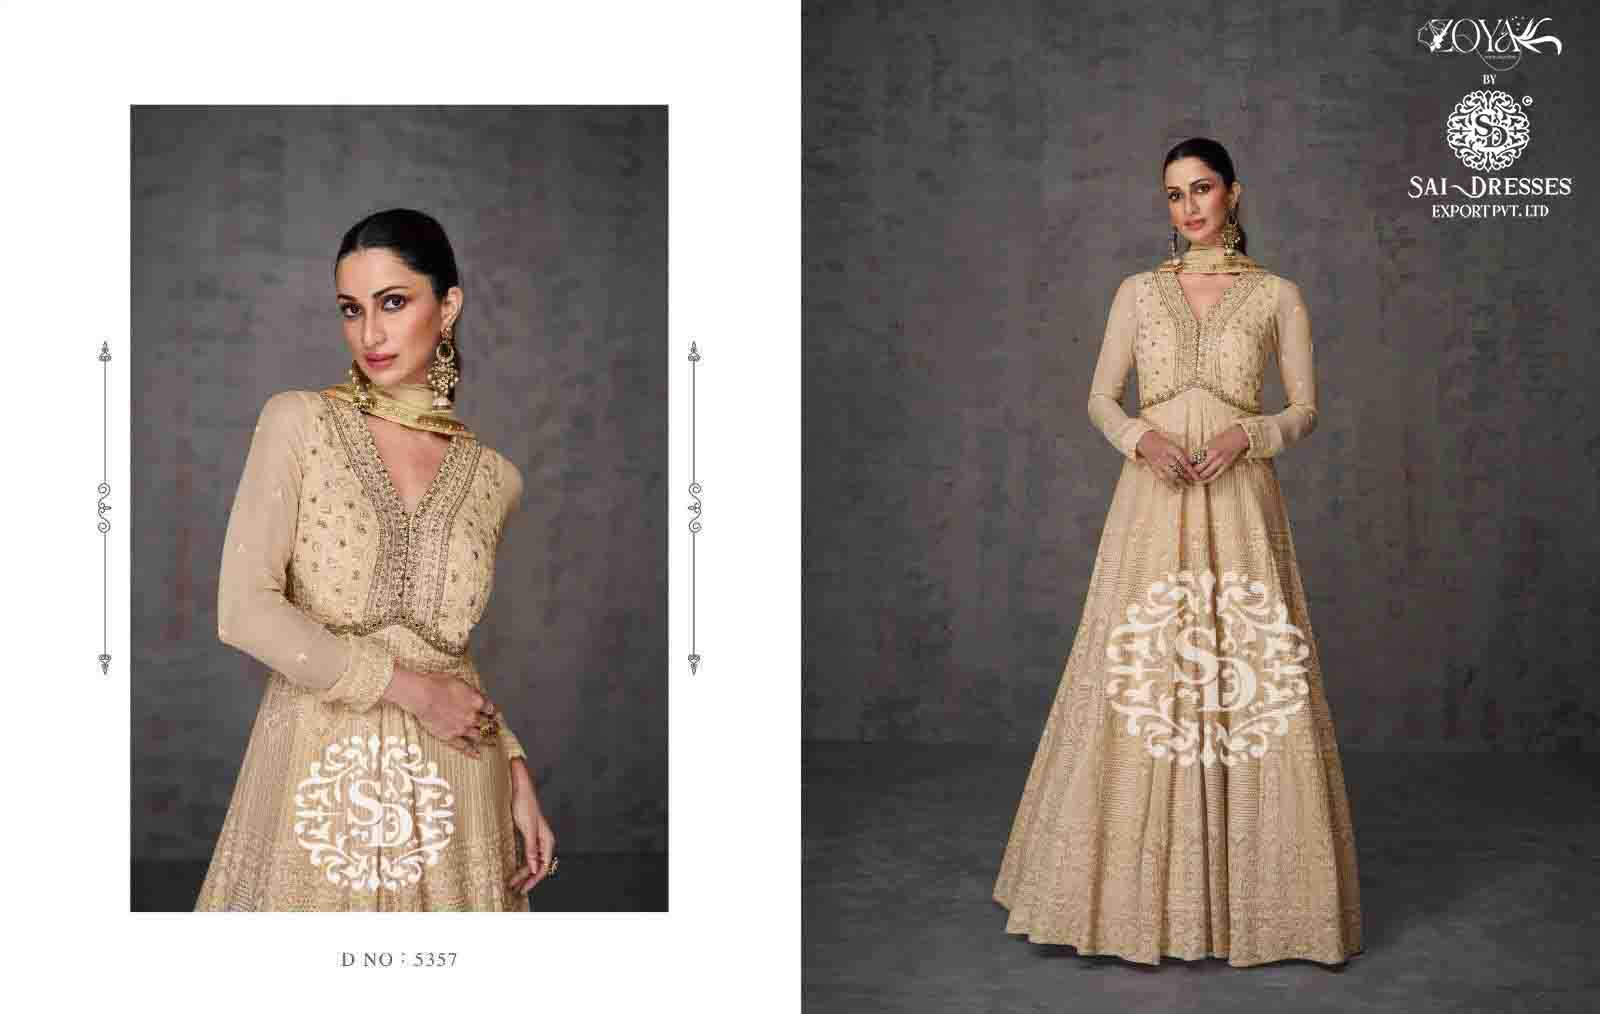 SAI DRESSES PRESENT AMEENA READYMADE BEAUTIFUL WEDDING WEAR DESIGNER LONG GOWN WITH DUPATTA IN WHOLESALE RATE IN SURAT